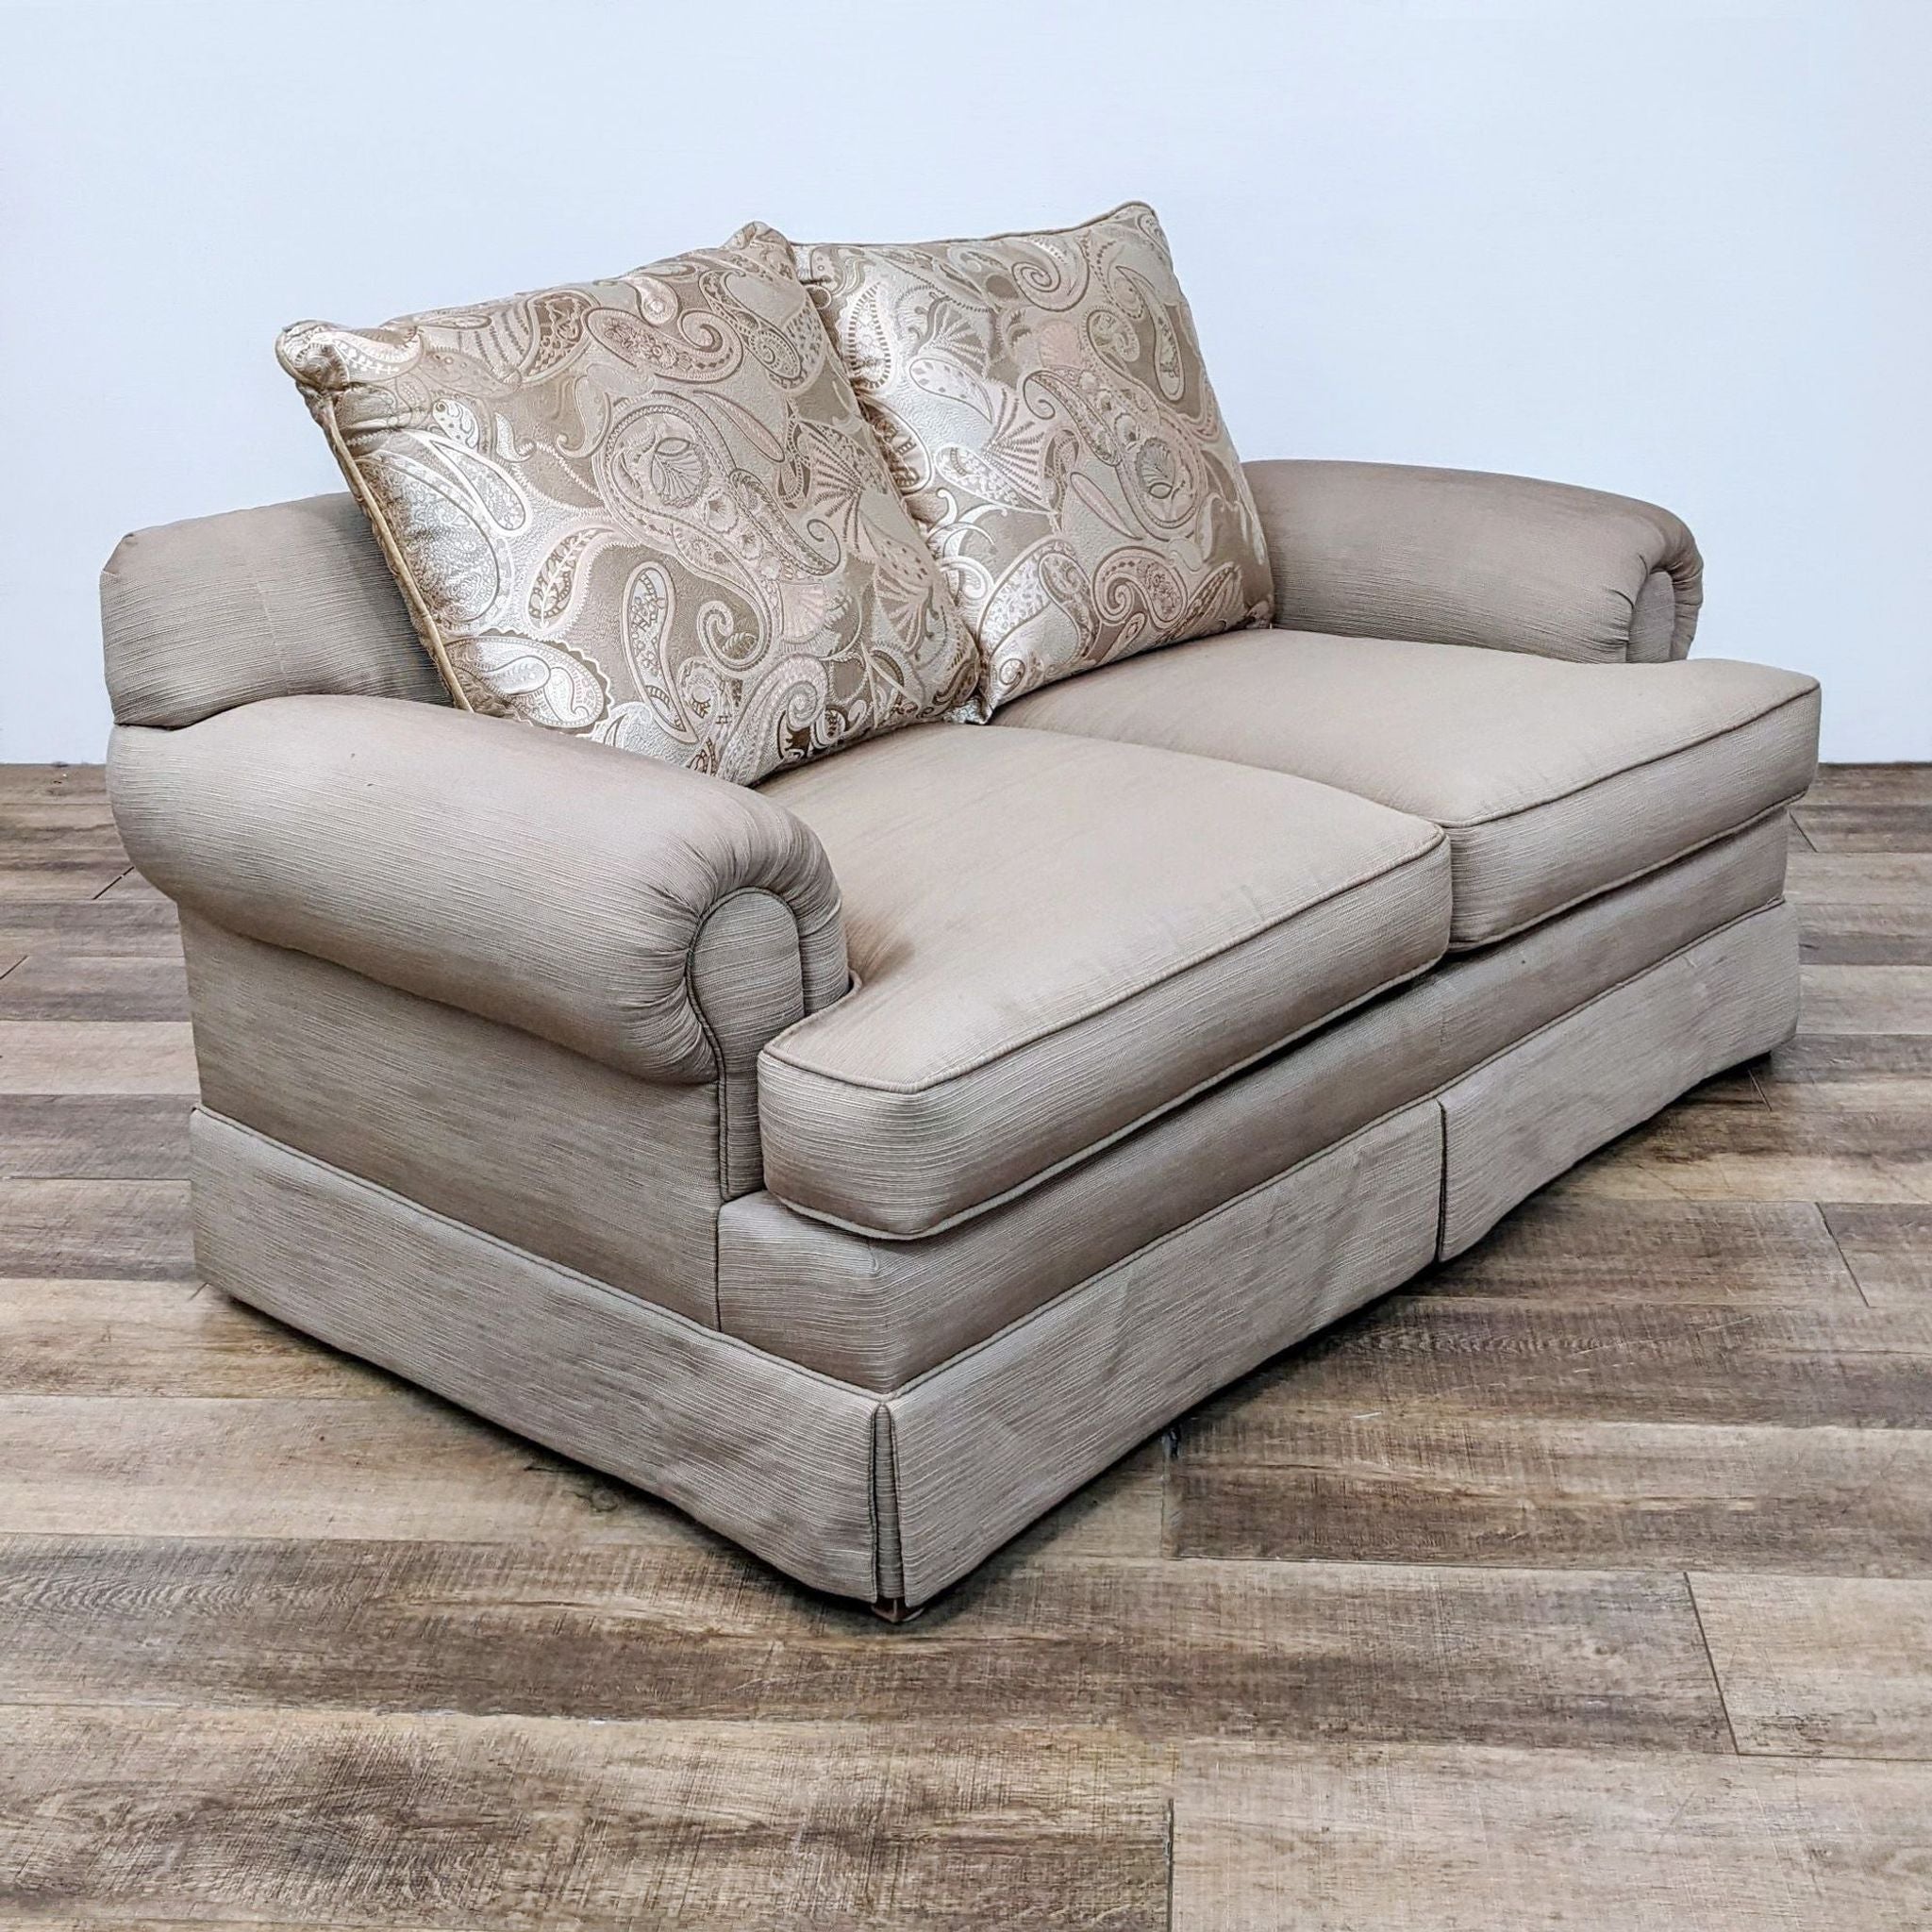 Neutral-tone fabric Loveseat with two back cushions featuring a paisley pattern, set on a wooden floor.